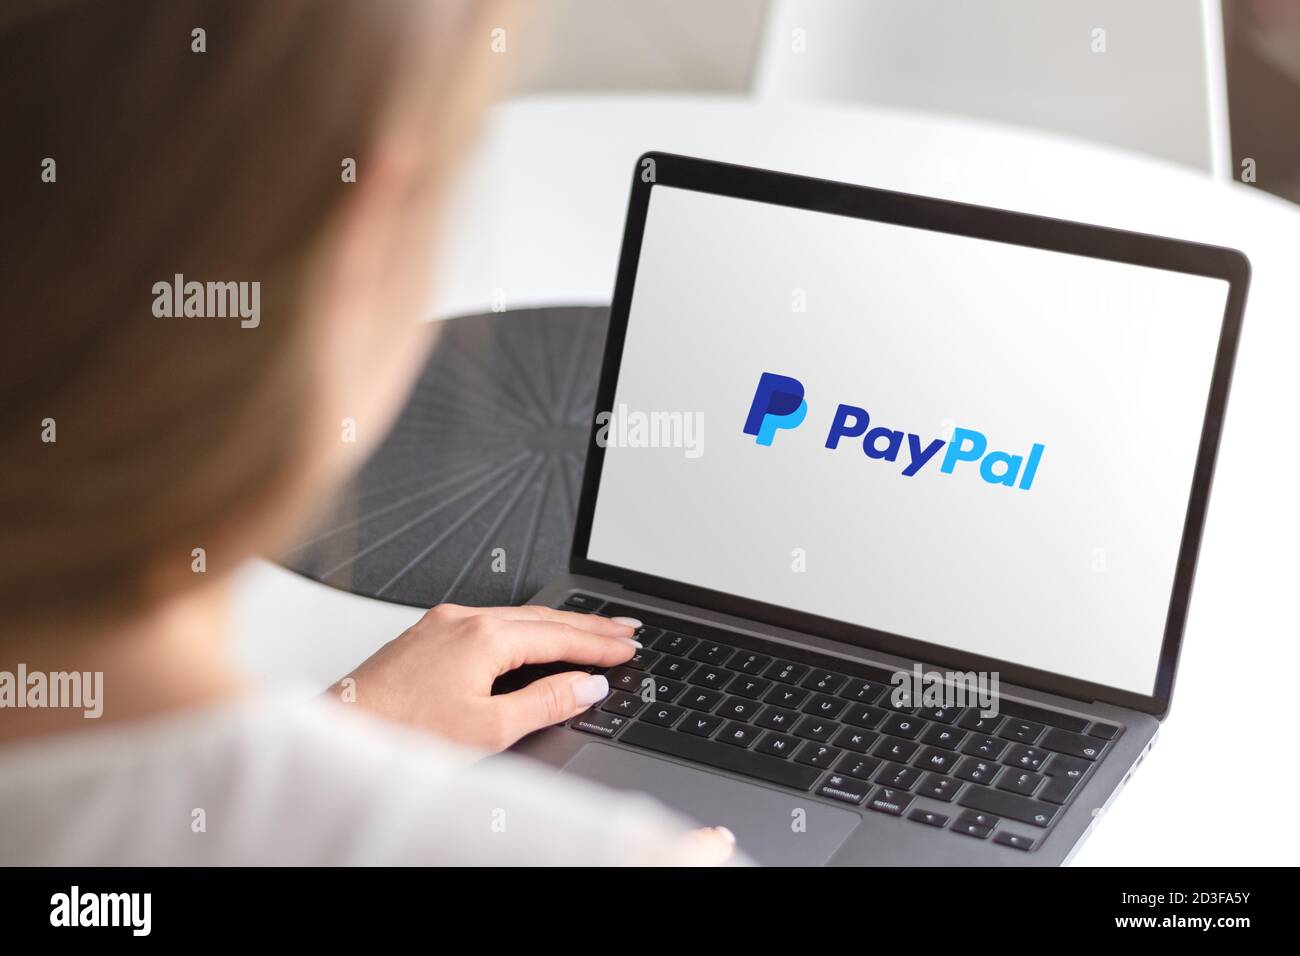 Guilherand-Granges, France - October 08, 2020. Smartphone with Paypal logo. American company operating a worldwide online payment system. Online money Stock Photo